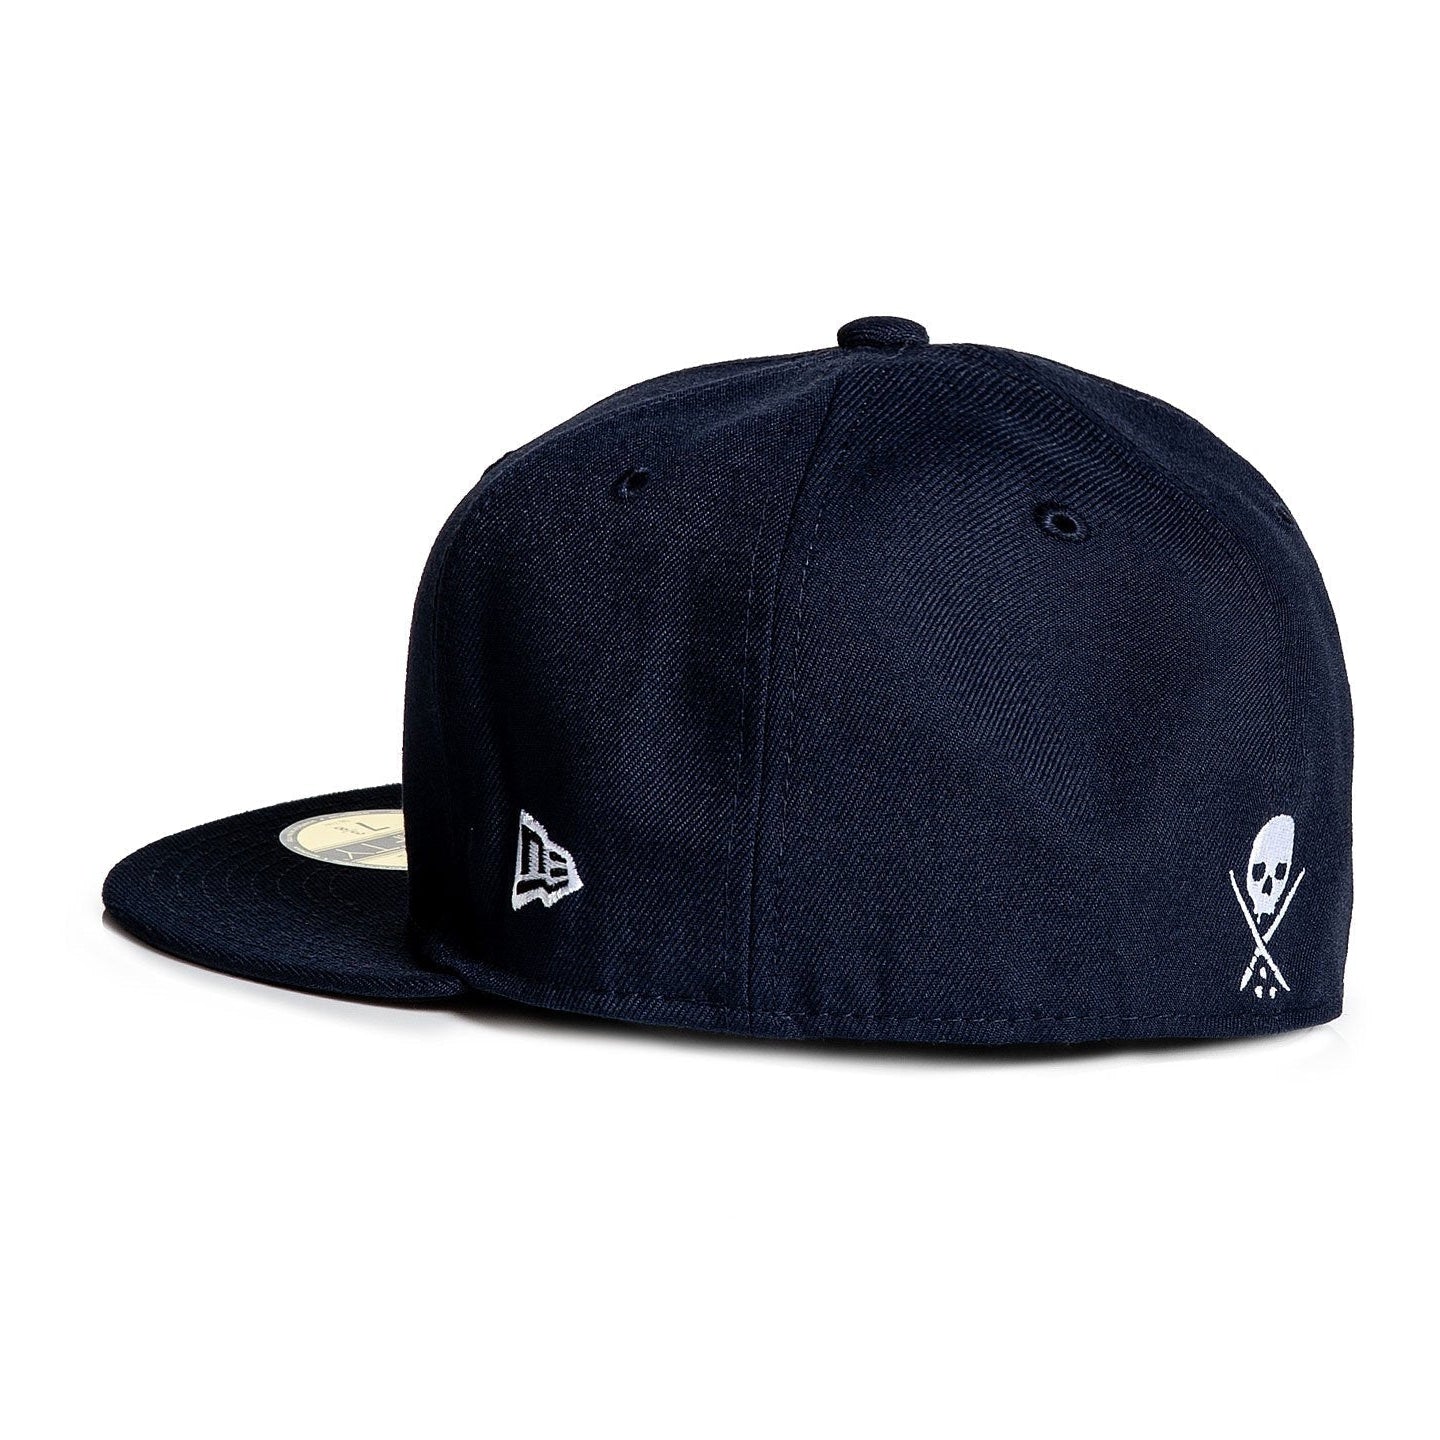 Sullen Badge Navy Stretched Fitted Cap-Mens Beanies, Hats & Snapback Caps-Scarlett Dawn